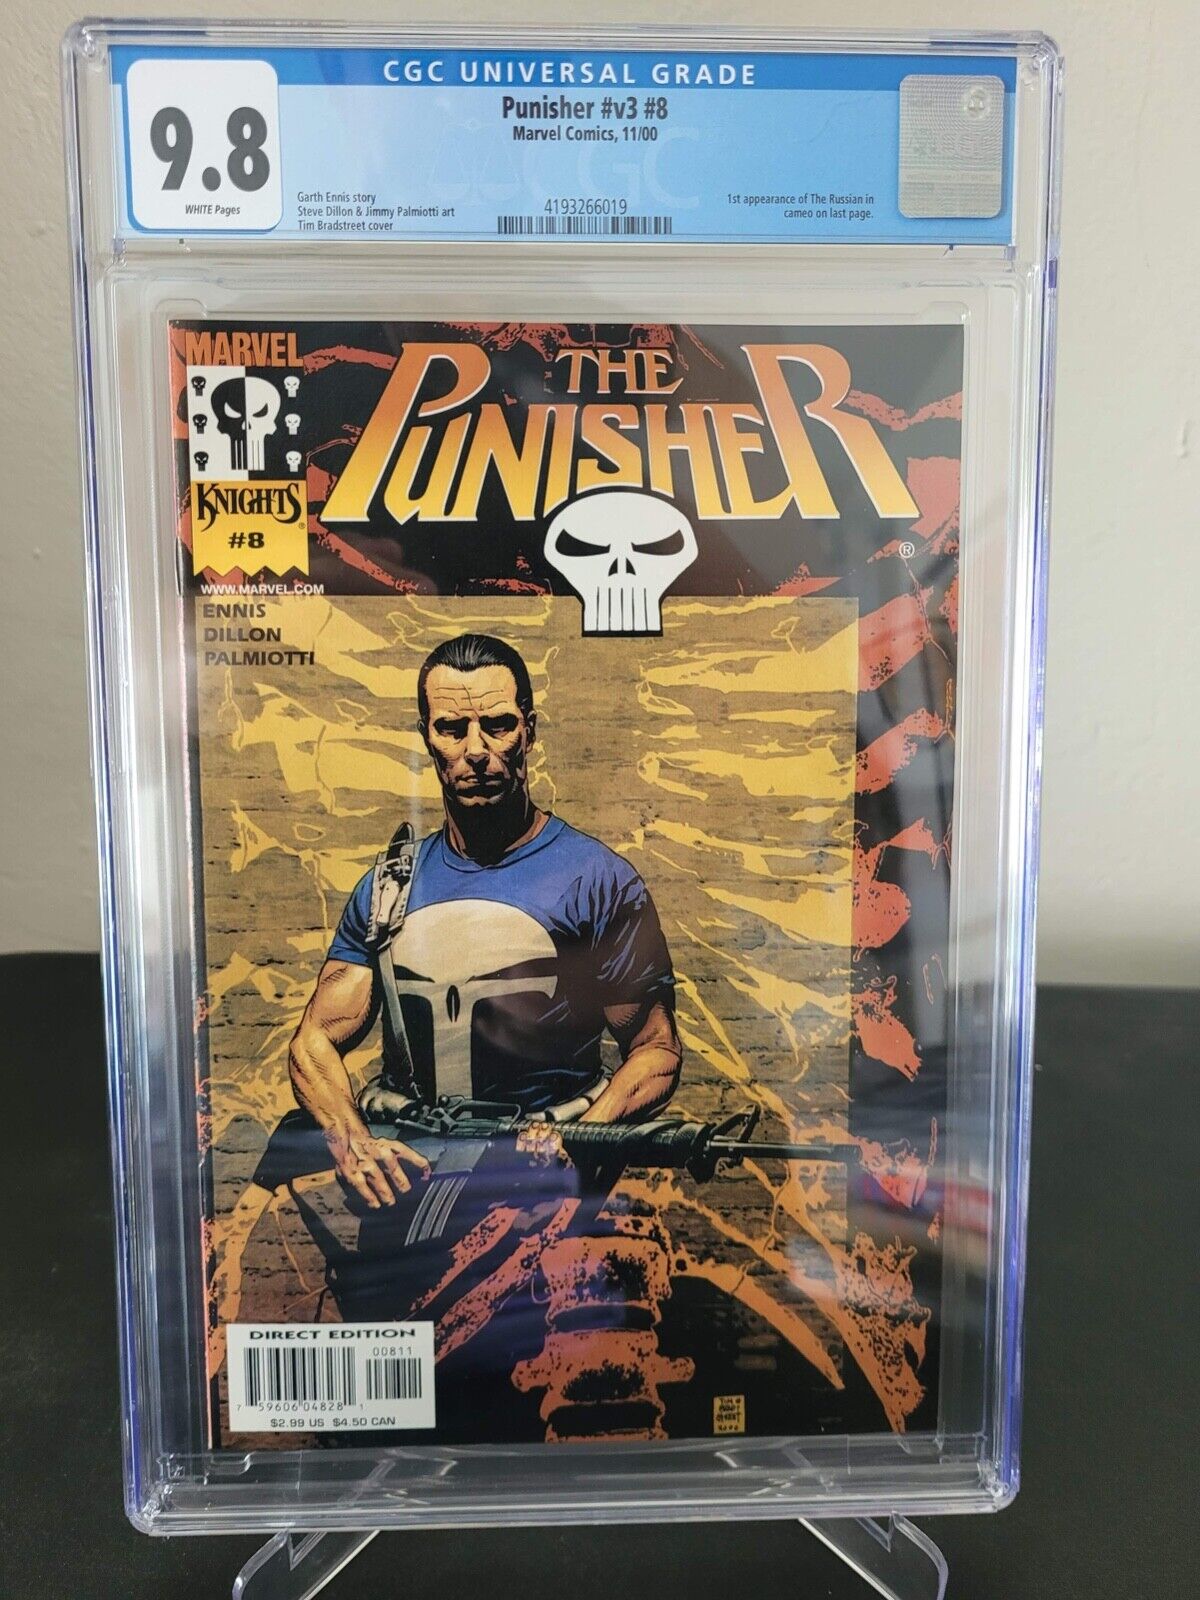 THE PUNISHER Vol 3 #8 CGC 9.8 GRADED MARVEL COMICS ENNIS 1ST APPEARANCE RUSSIAN